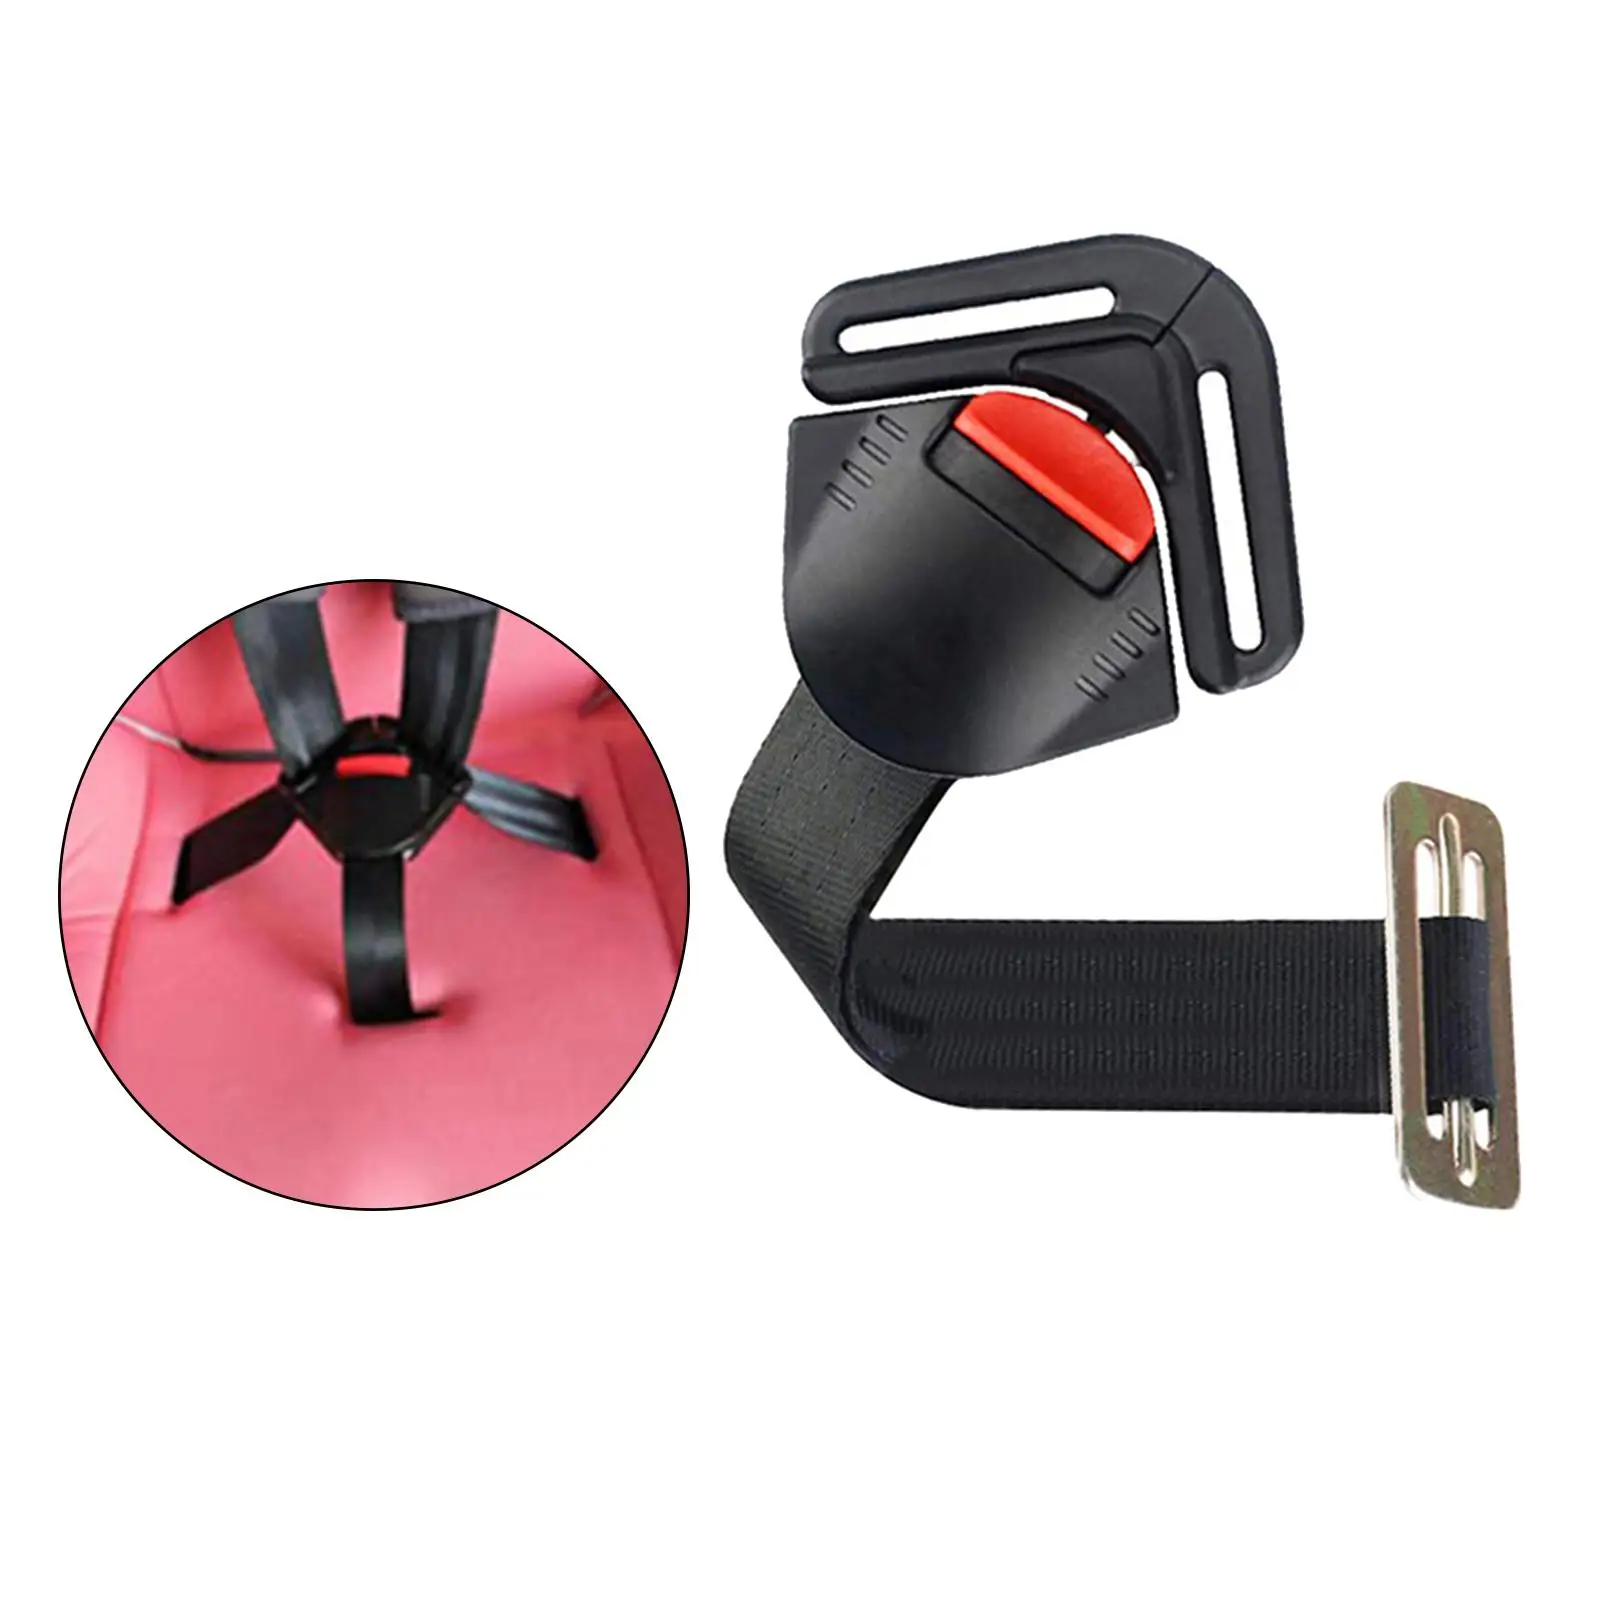 Car Child Seat Safety Belt Buckle 5 Point Locking Buckle Clip Toddler Harness Clip Fixed Lock Buckle for Pushchair Stroller